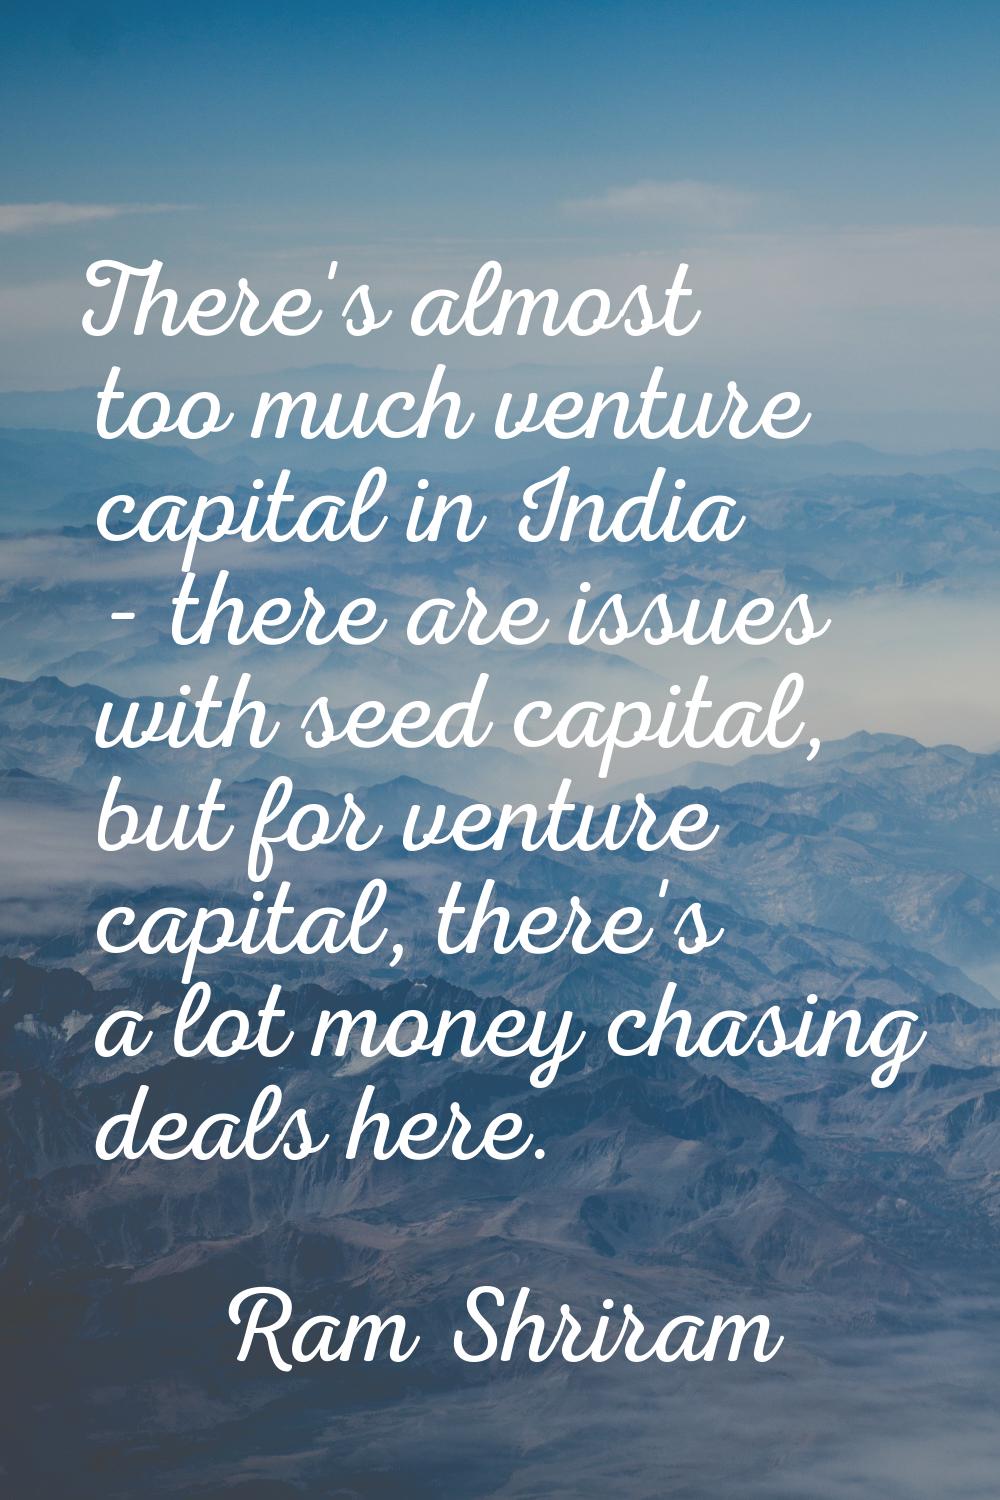 There's almost too much venture capital in India - there are issues with seed capital, but for vent